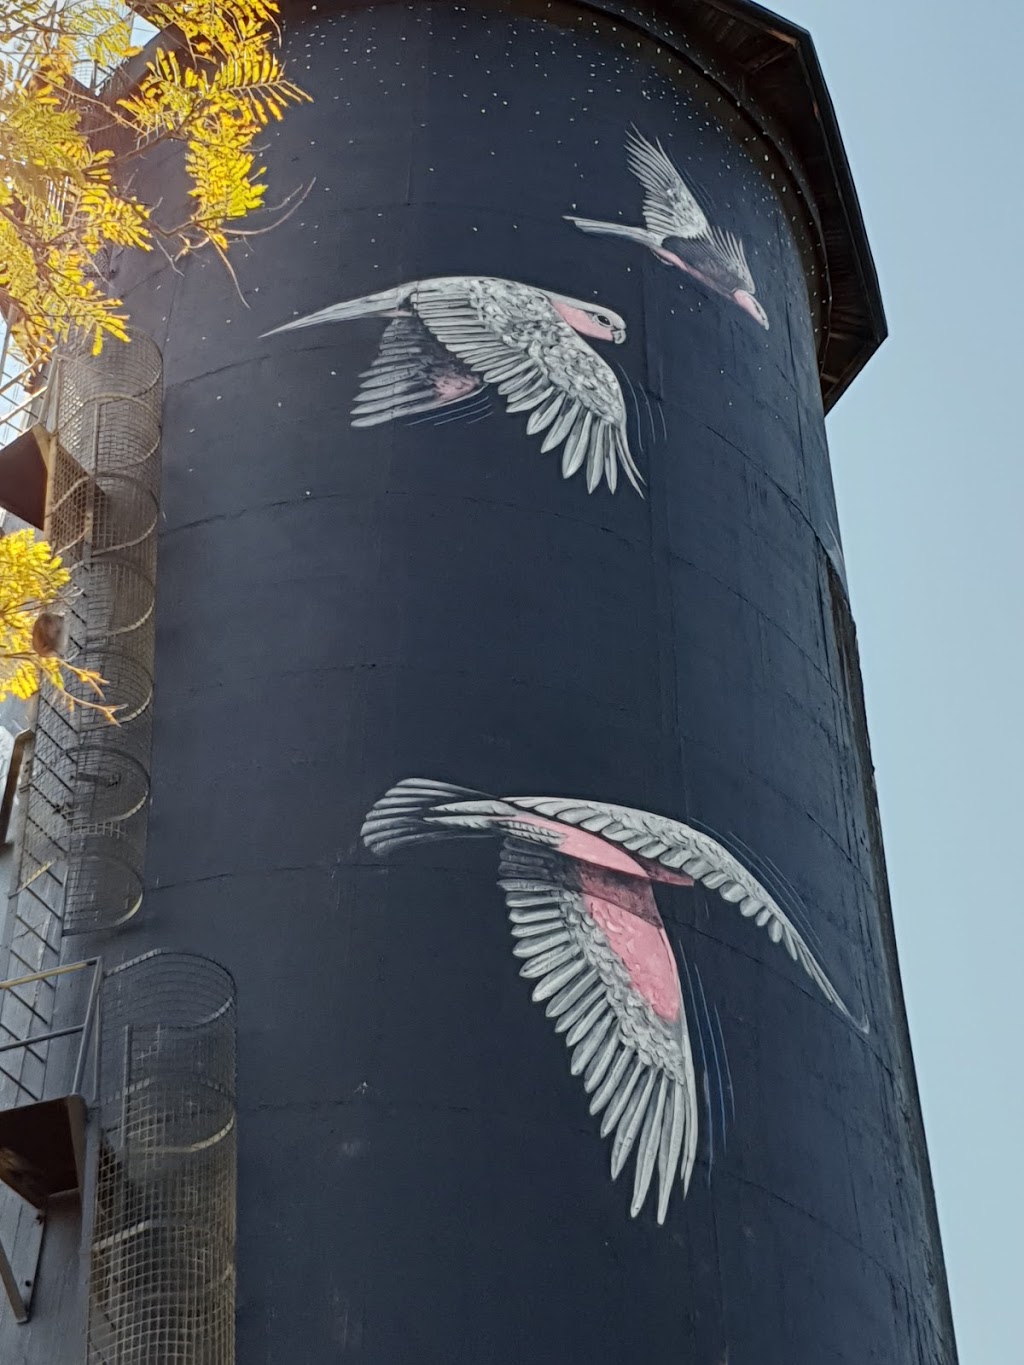 Silo art. Painted water tower by John Murray | museum | Coonamble NSW 2829, Australia